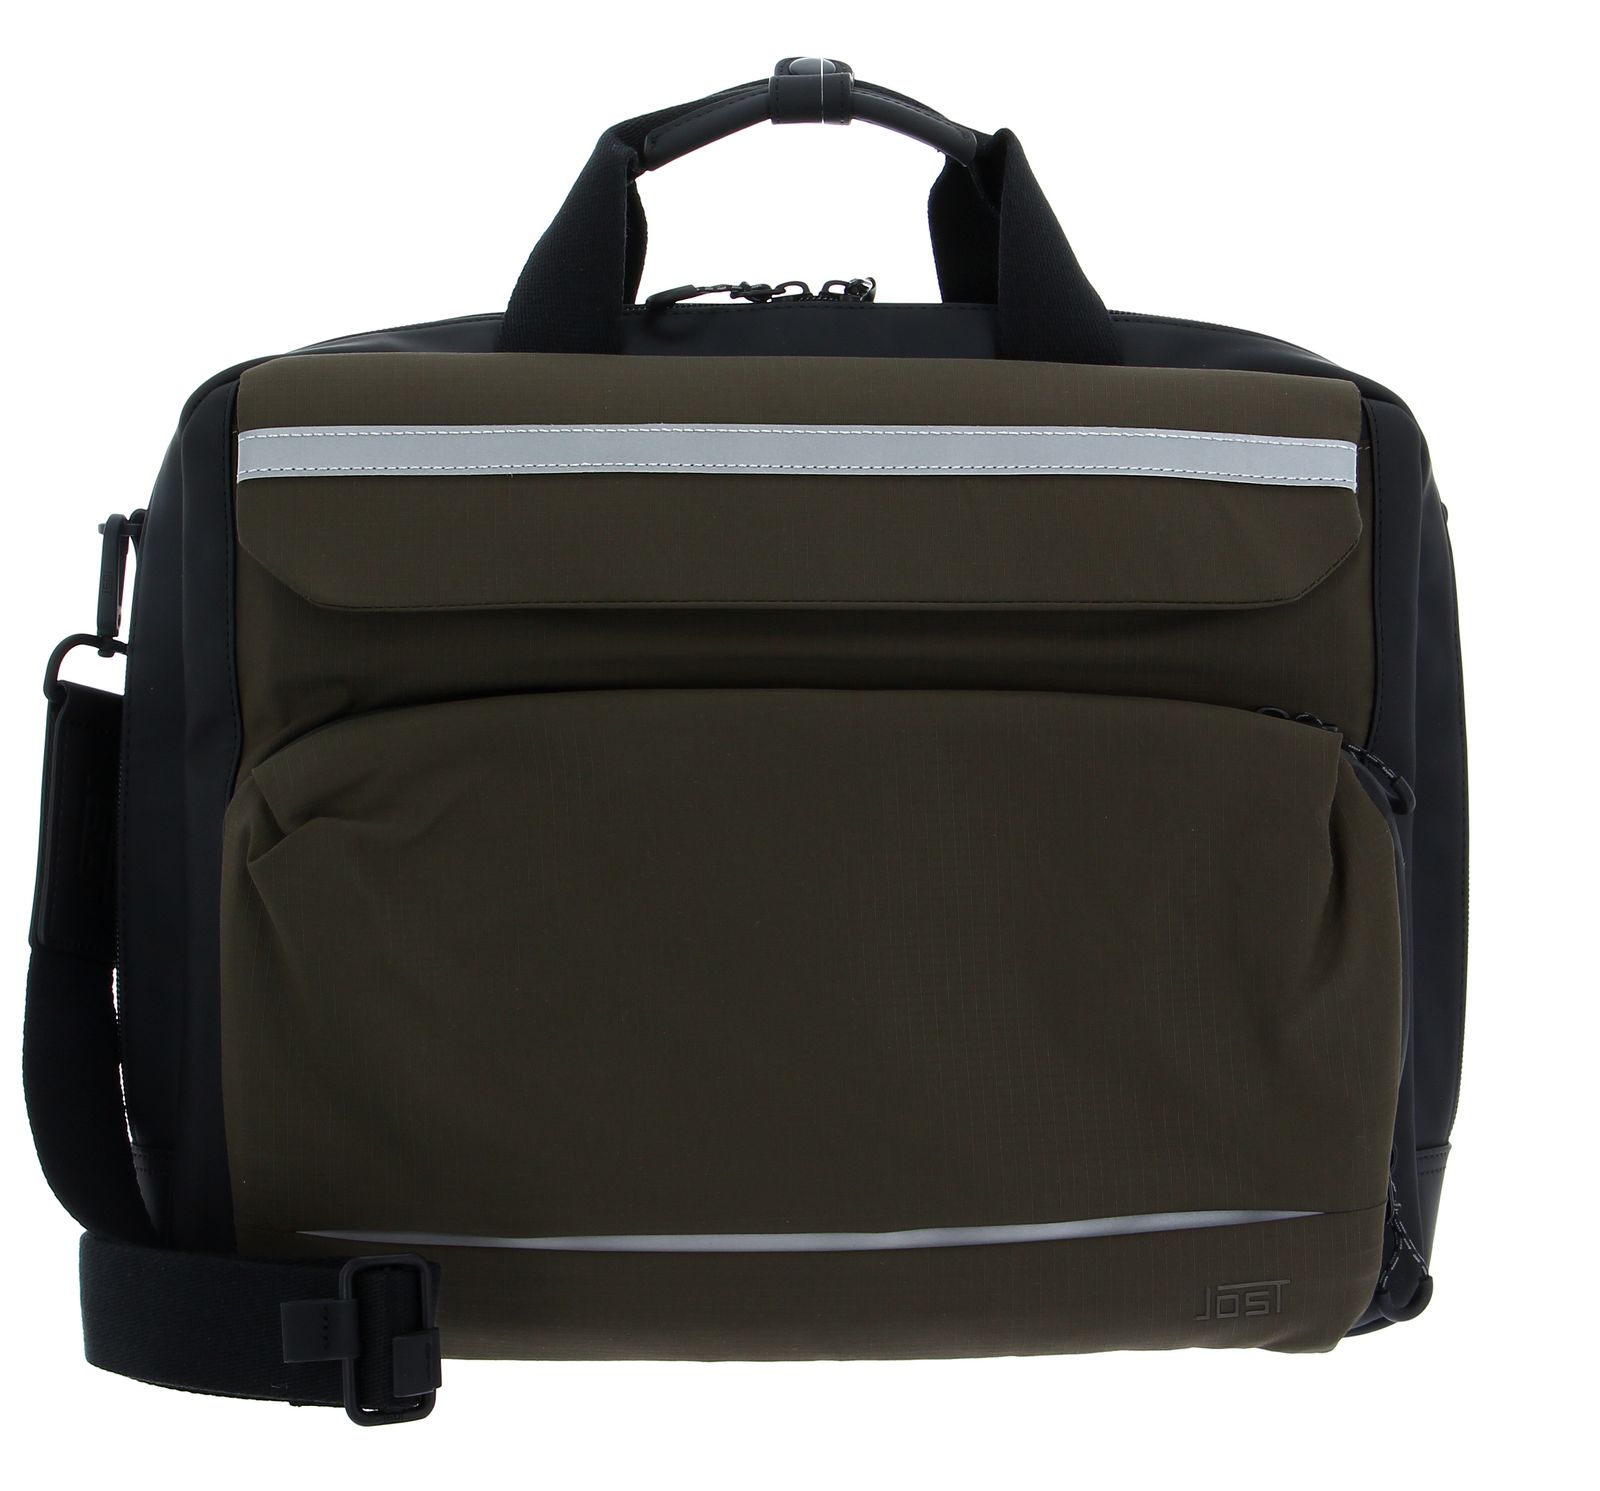 Belkin Laptop Computer Bag Carrying Case with Strap,Black  17"x14"x4" | eBay